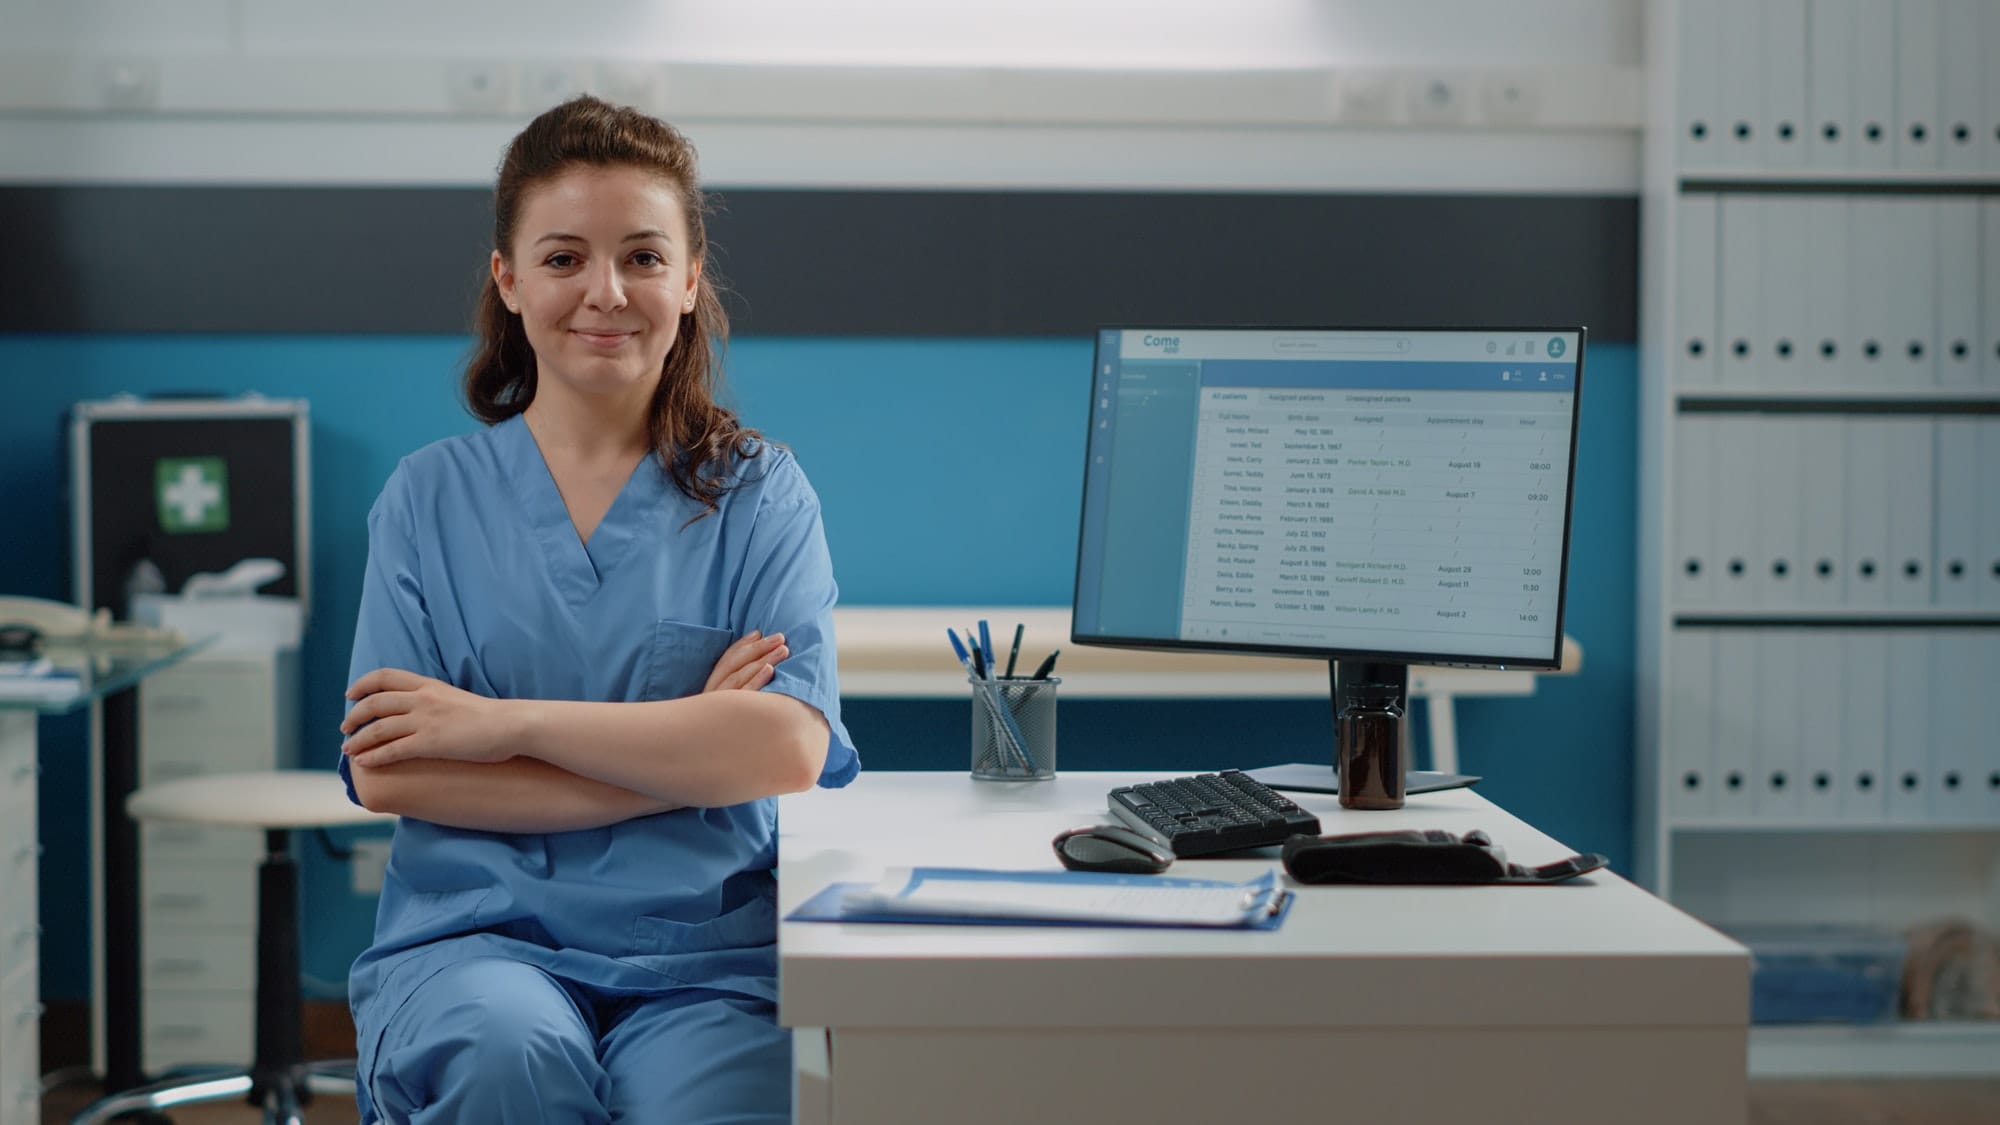 Portrait of woman working as medical assistant at desk